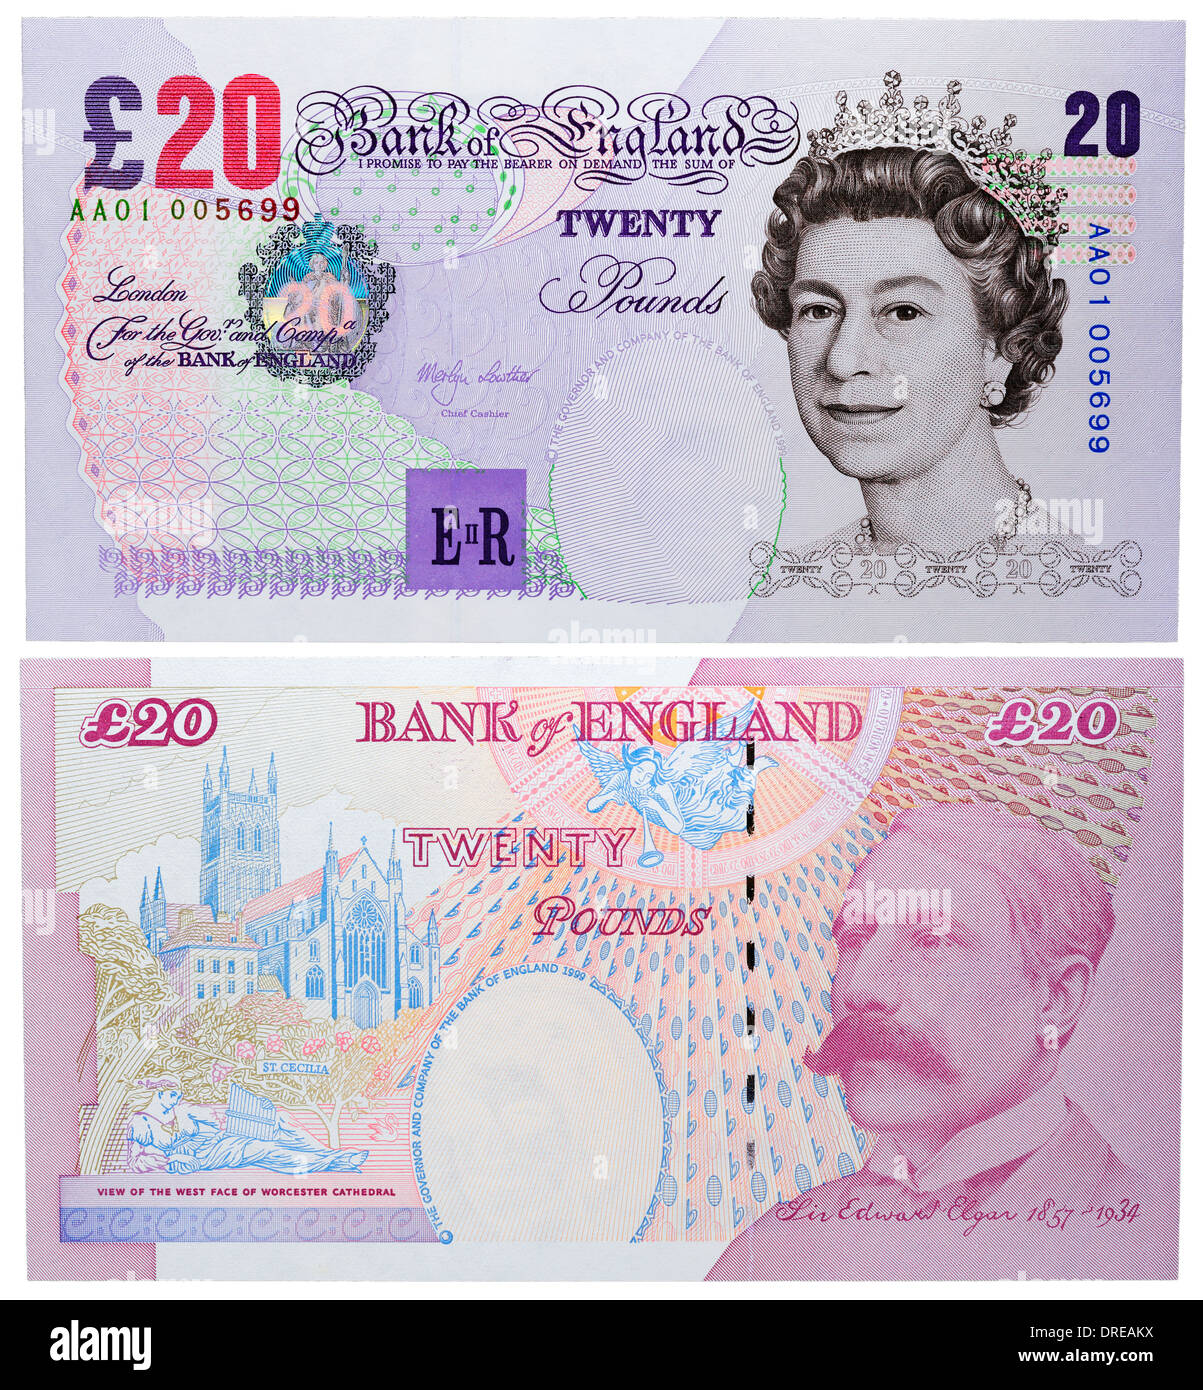 20 Pounds banknote, Queen Elizabeth II and Sir Edward Elgar, UK, 1999 Stock Photo